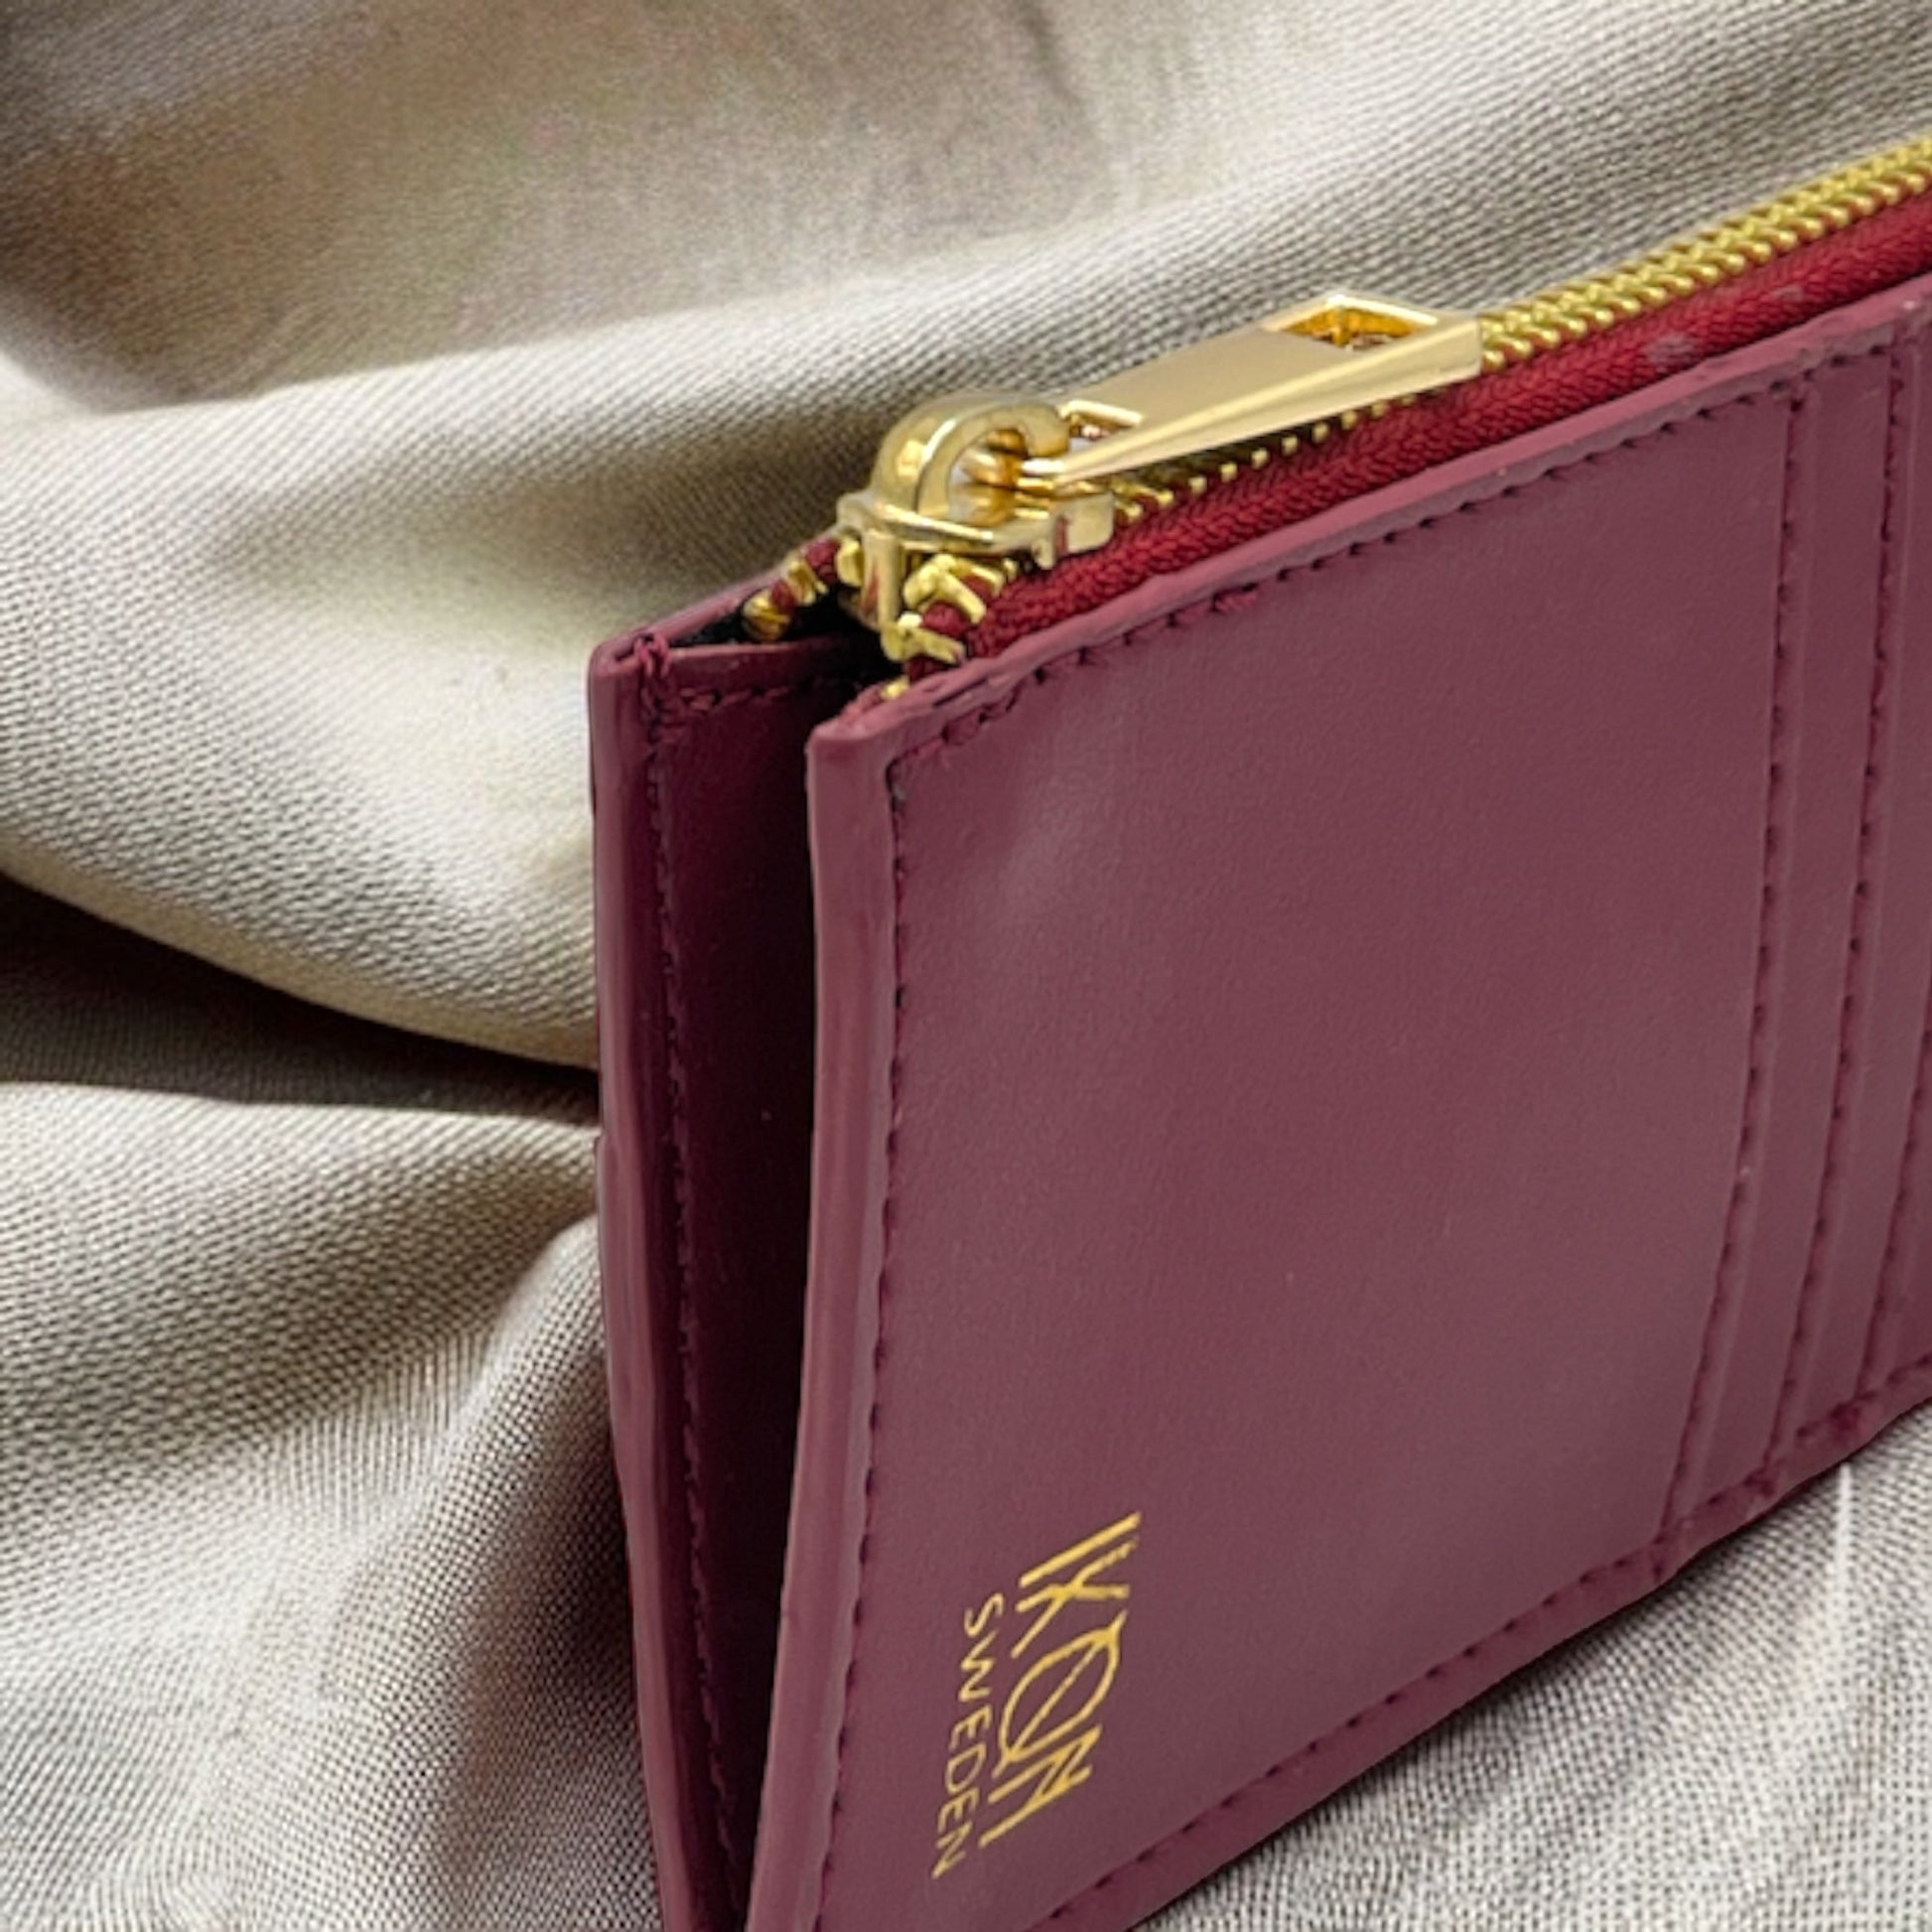 Wine Red Apple leather card holder